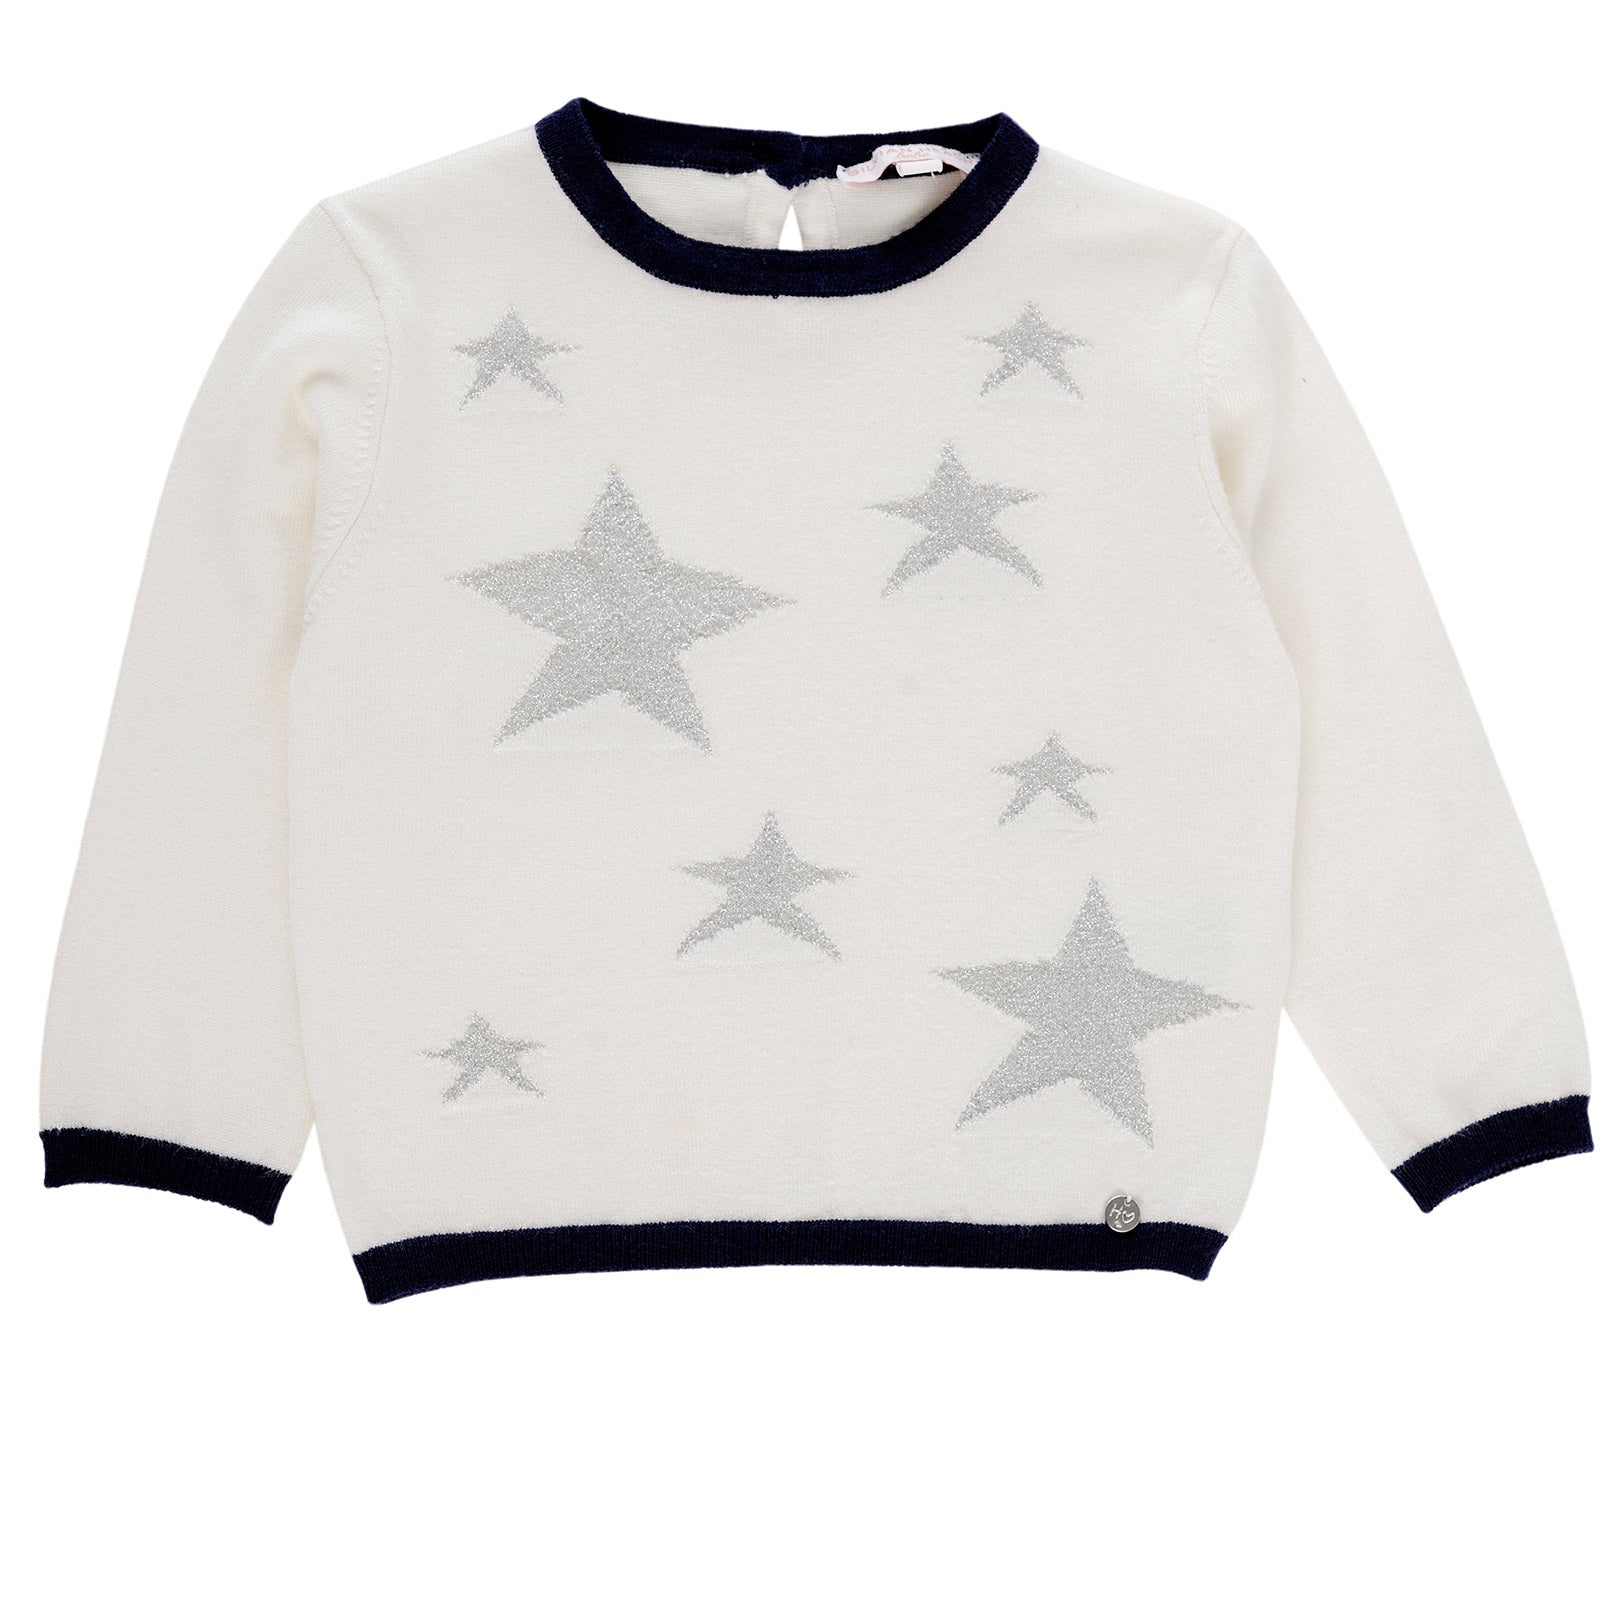 
  Sweater from the Silvian Heach Kids clothing line, star pattern
  in lurex and contrasting col...